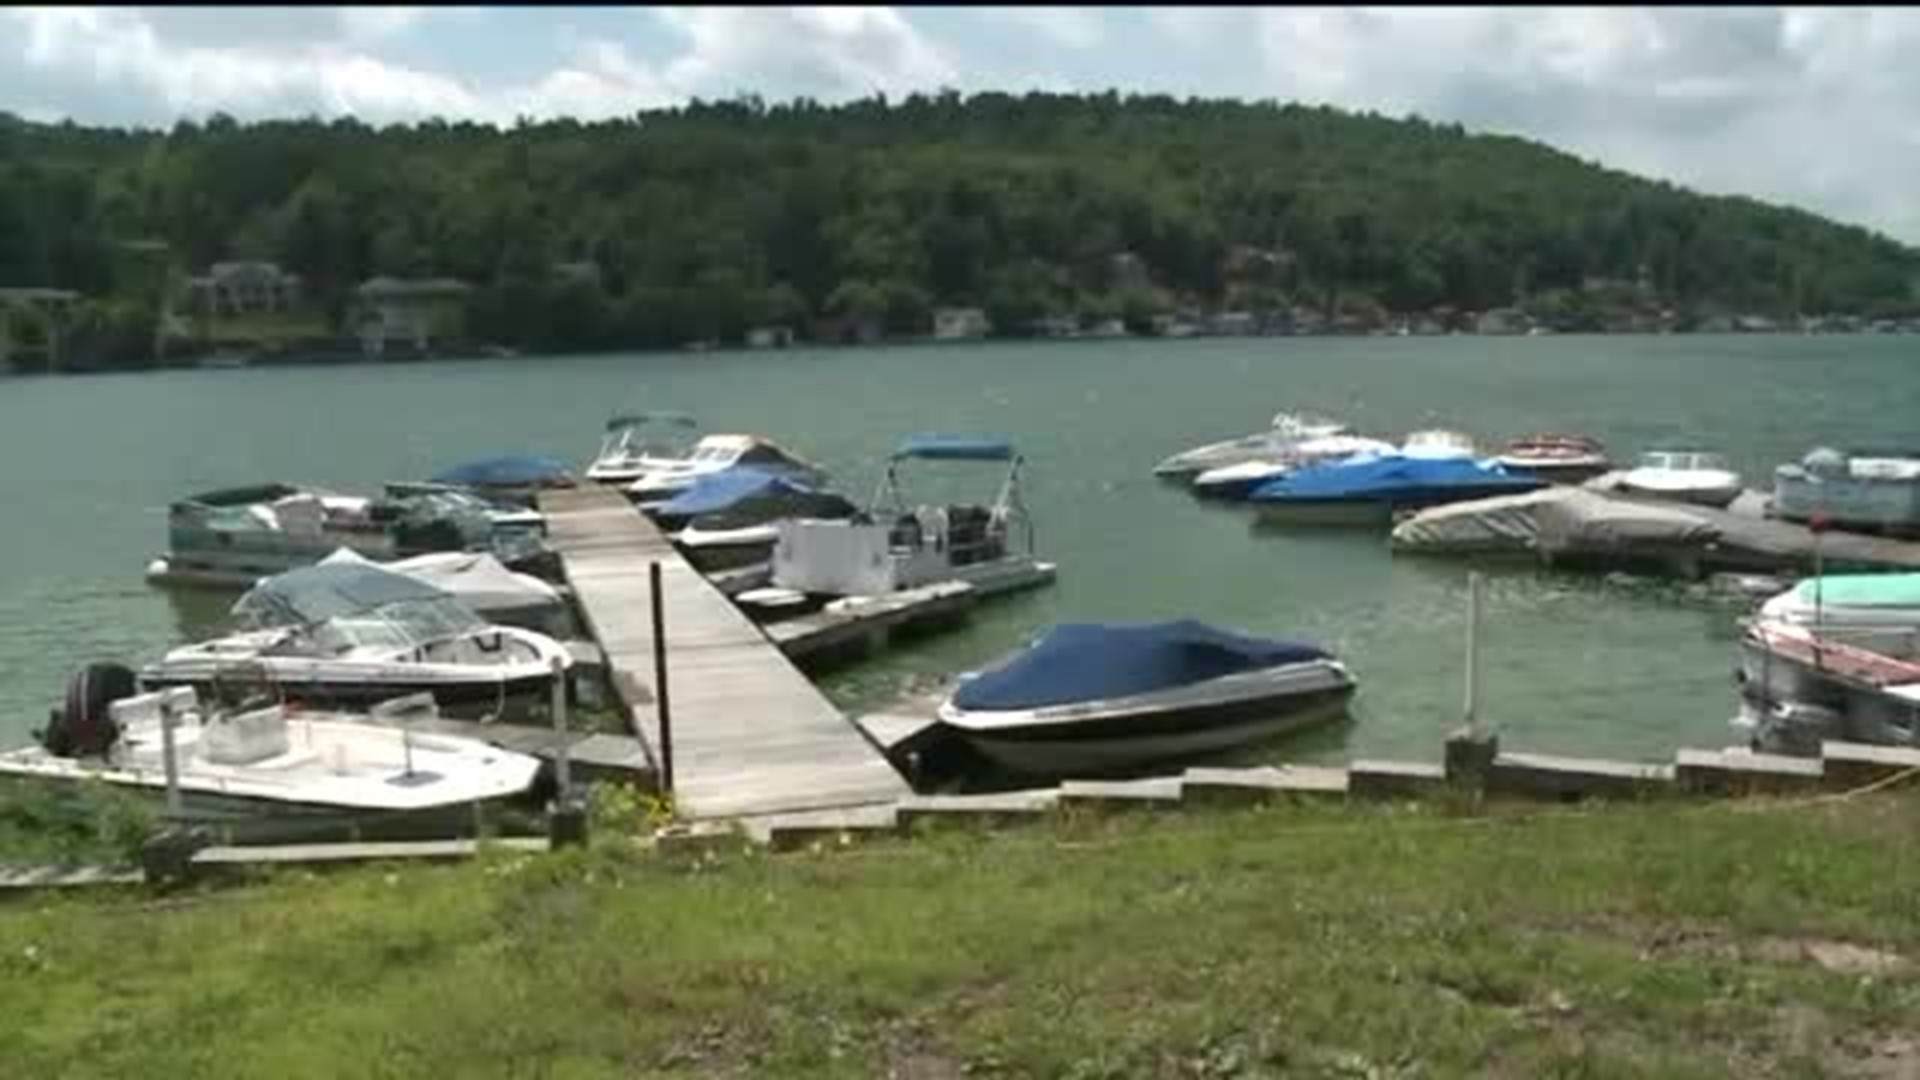 Holiday Crackdown on Intoxicated Boaters